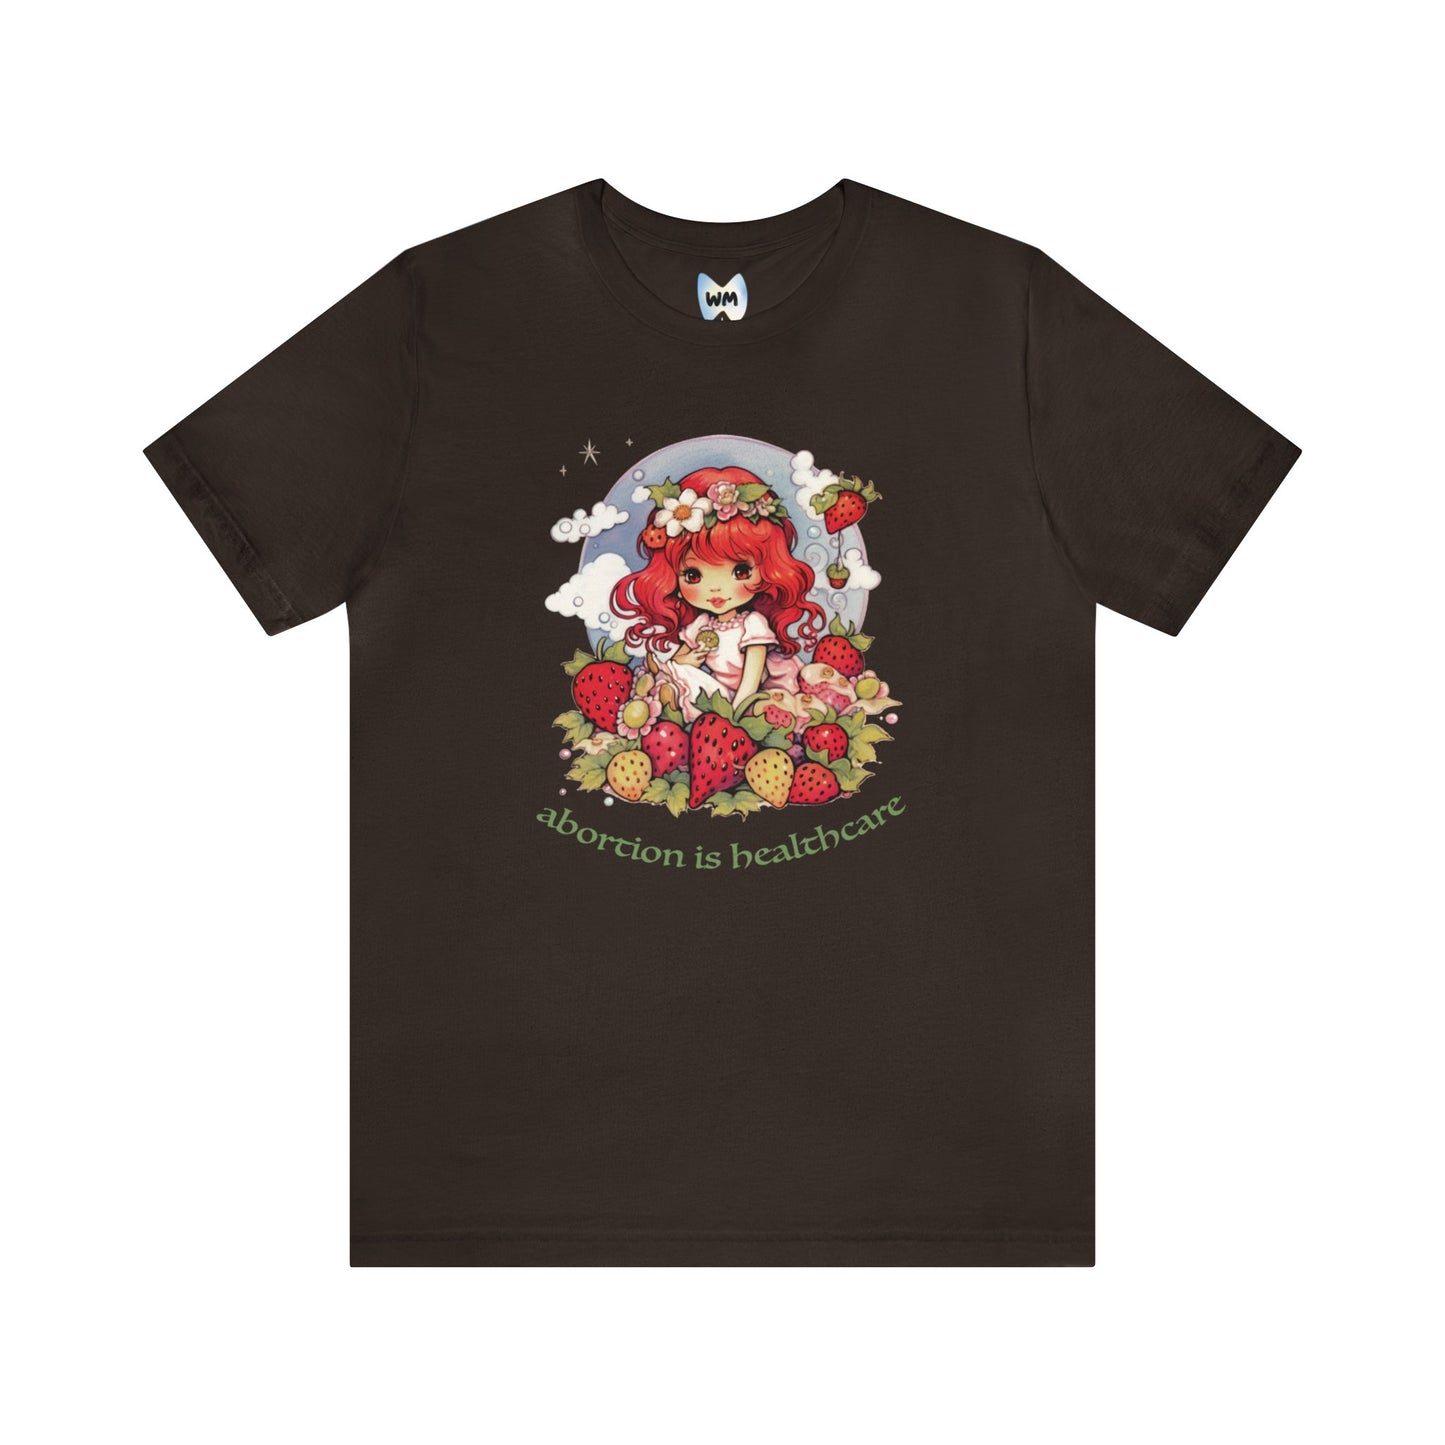 abortion is healthcare x Strawberry Shortcake Tee